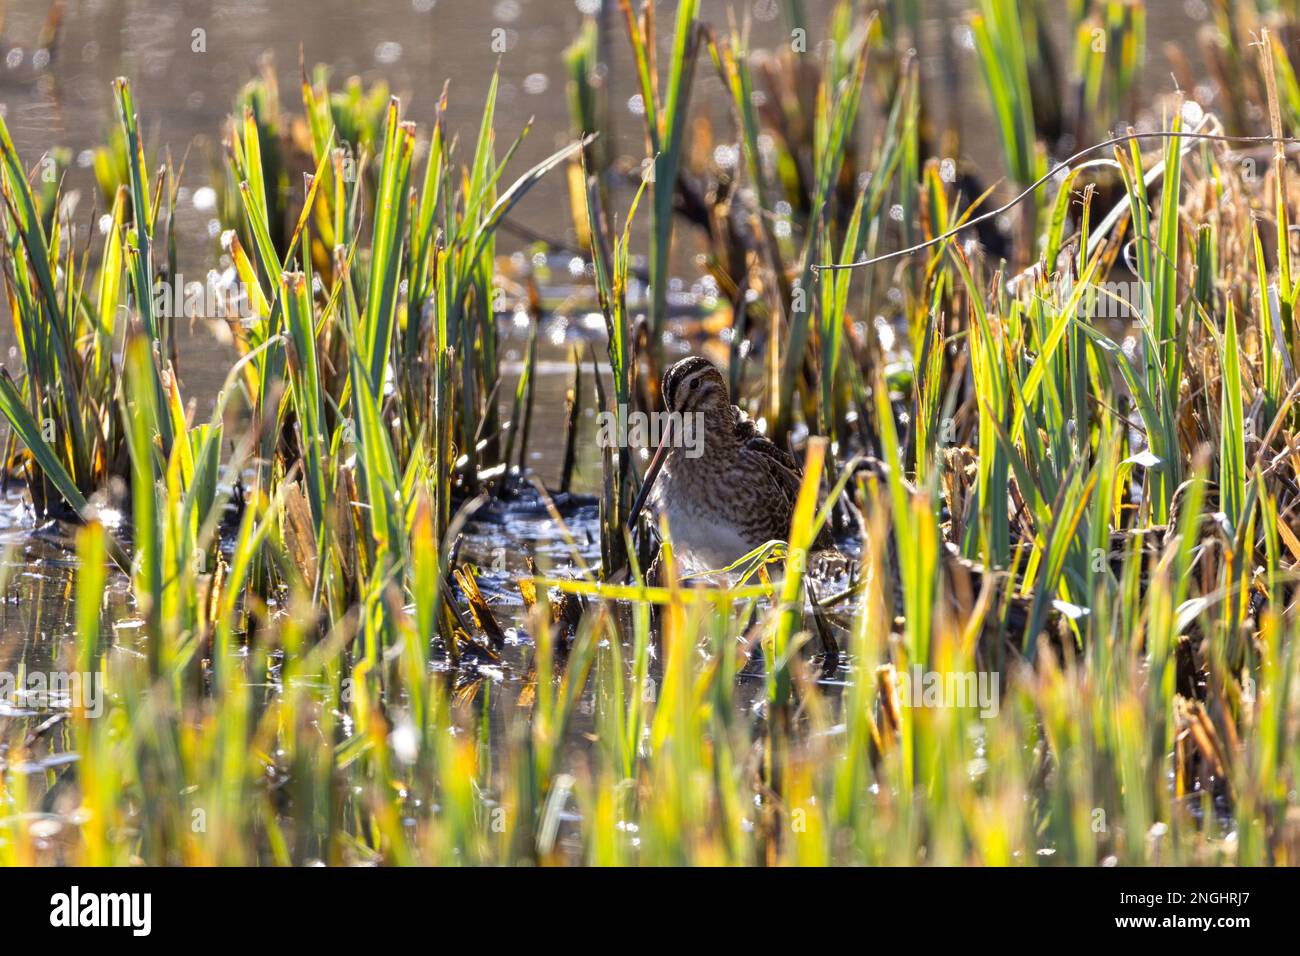 Snipe Gallinago small wader with very long fine bill creamy striped head and back reddish brown tail paler underside in short waterside vegetation Stock Photo